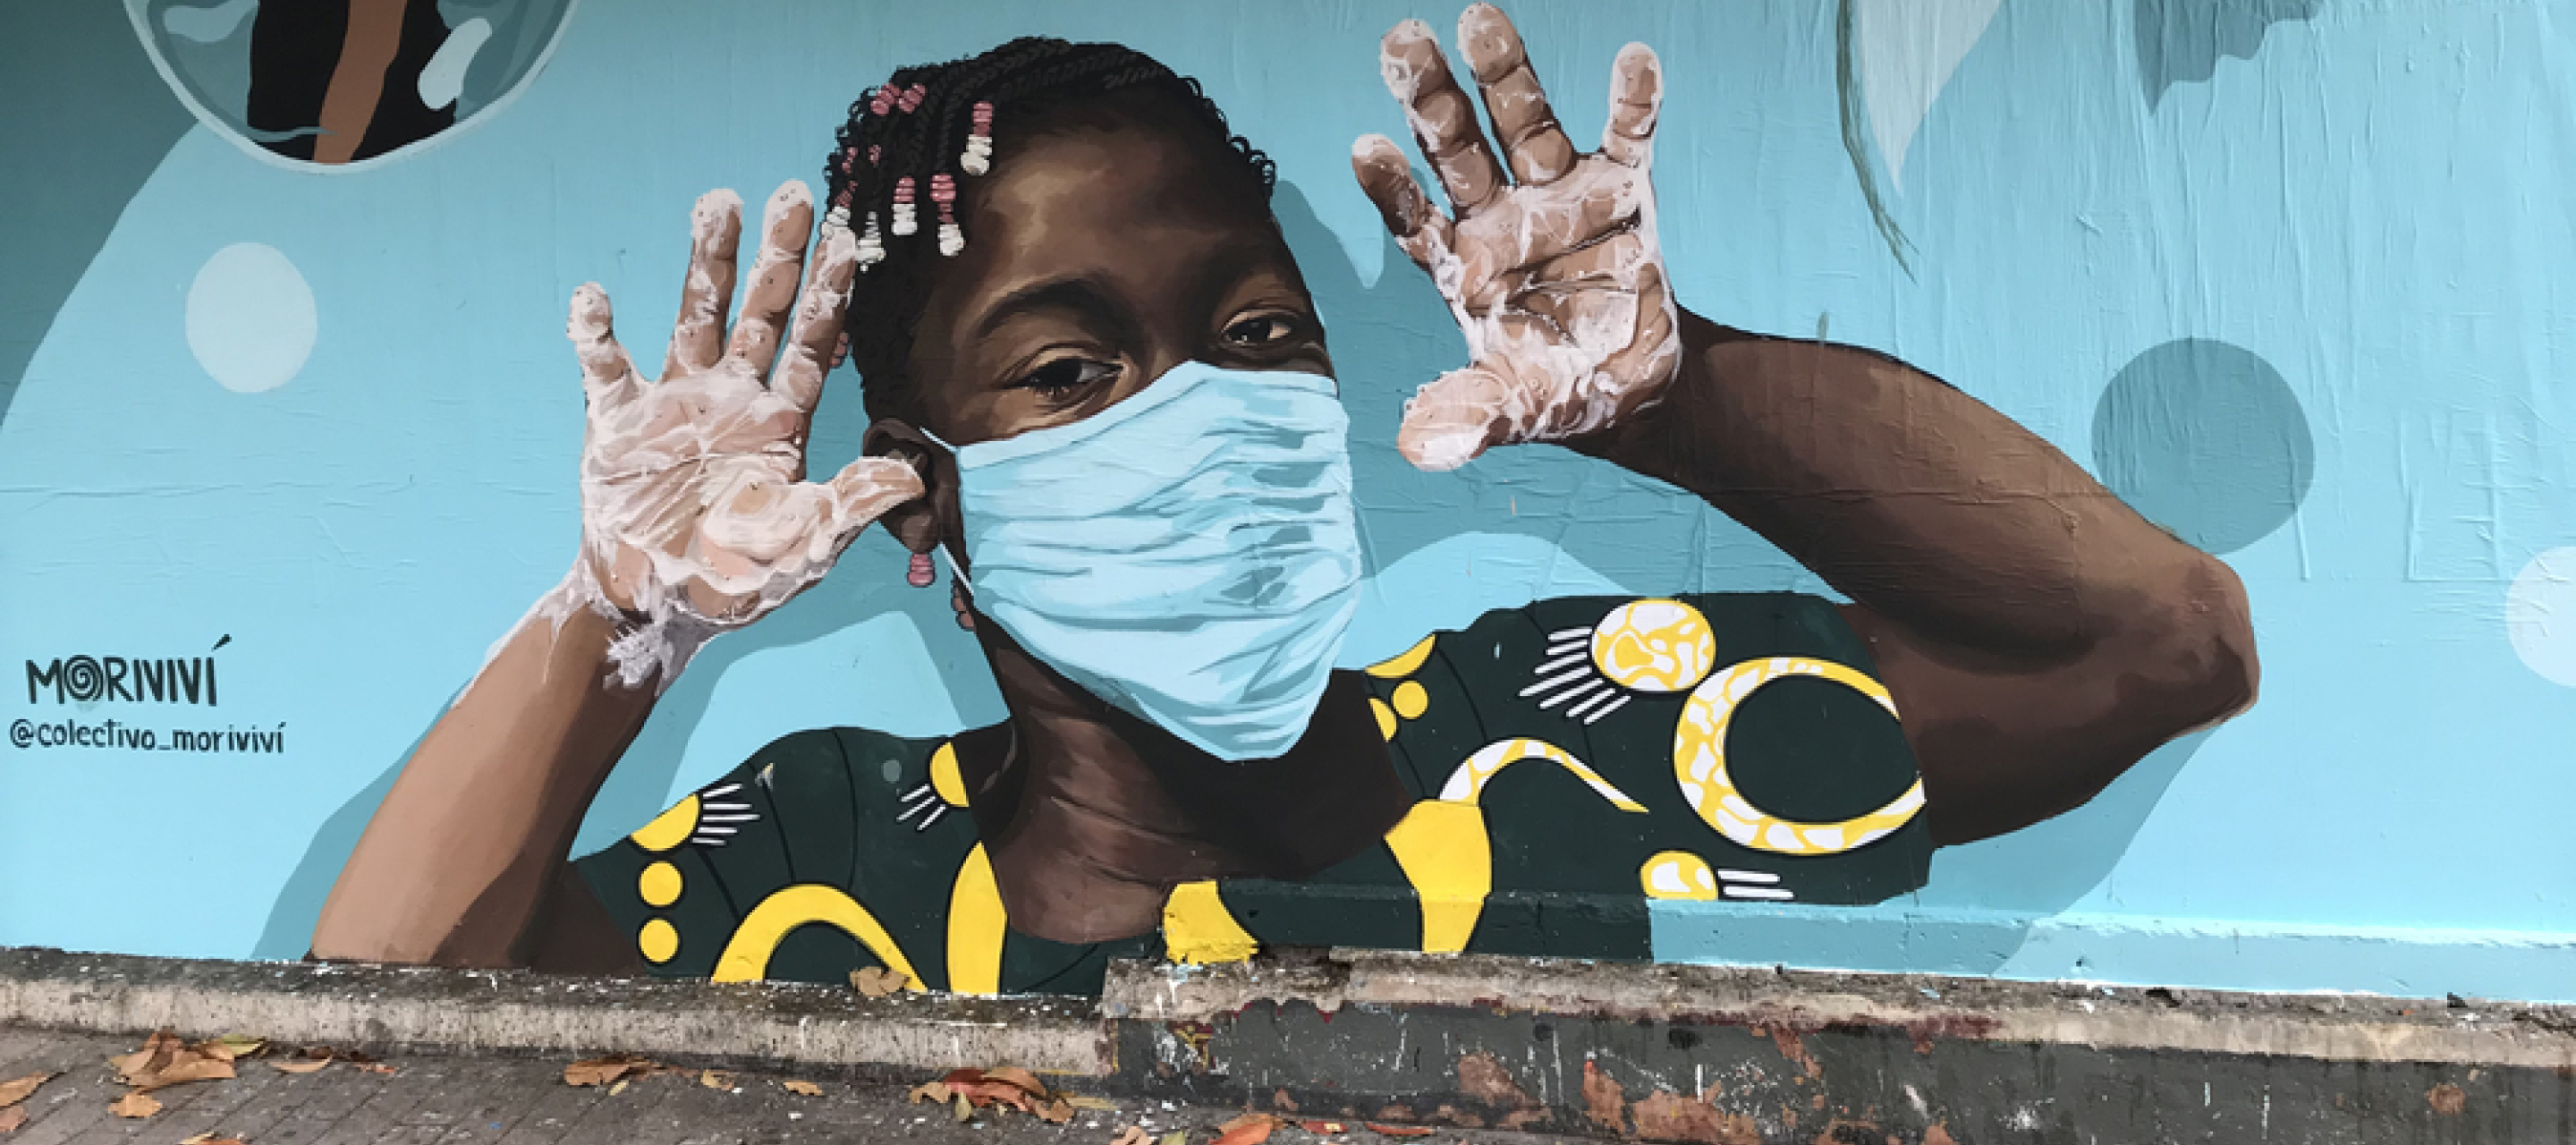 In Puerto Rico, Doctors Without Borders/Médecins Sans Frontières (MSF) and local partners have conducted health promotion campaigns that focus on hand washing, wearing masks in public, and physical distancing. MSF commissioned a series of street murals to promote these important health messages in busy areas of San Juan where homeless people also shelter.